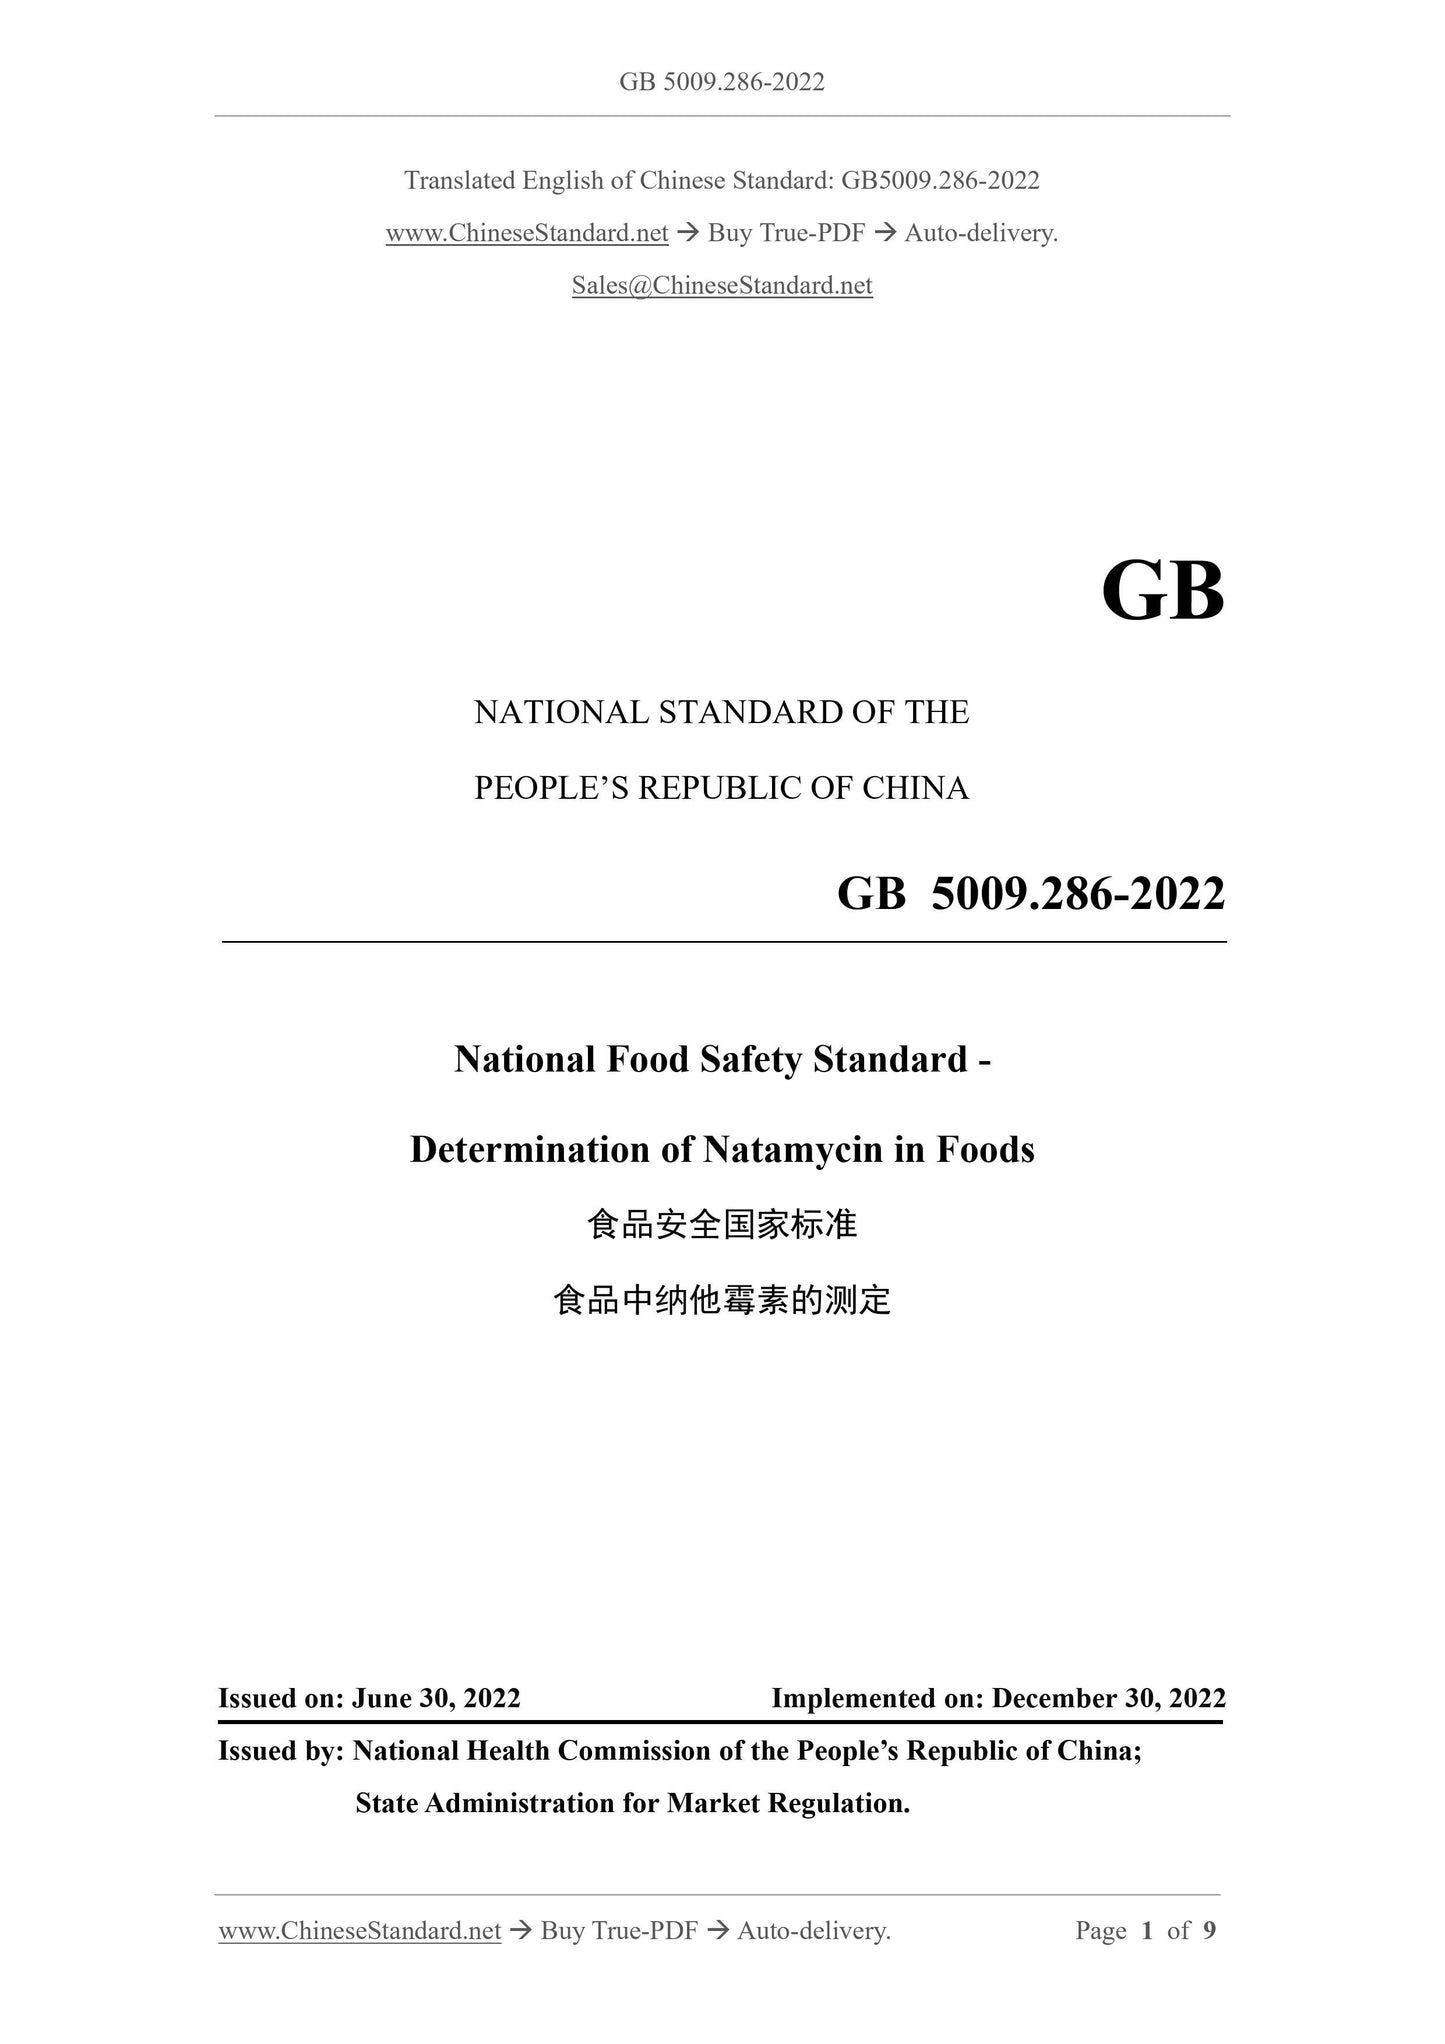 GB 5009.286-2022 Page 1